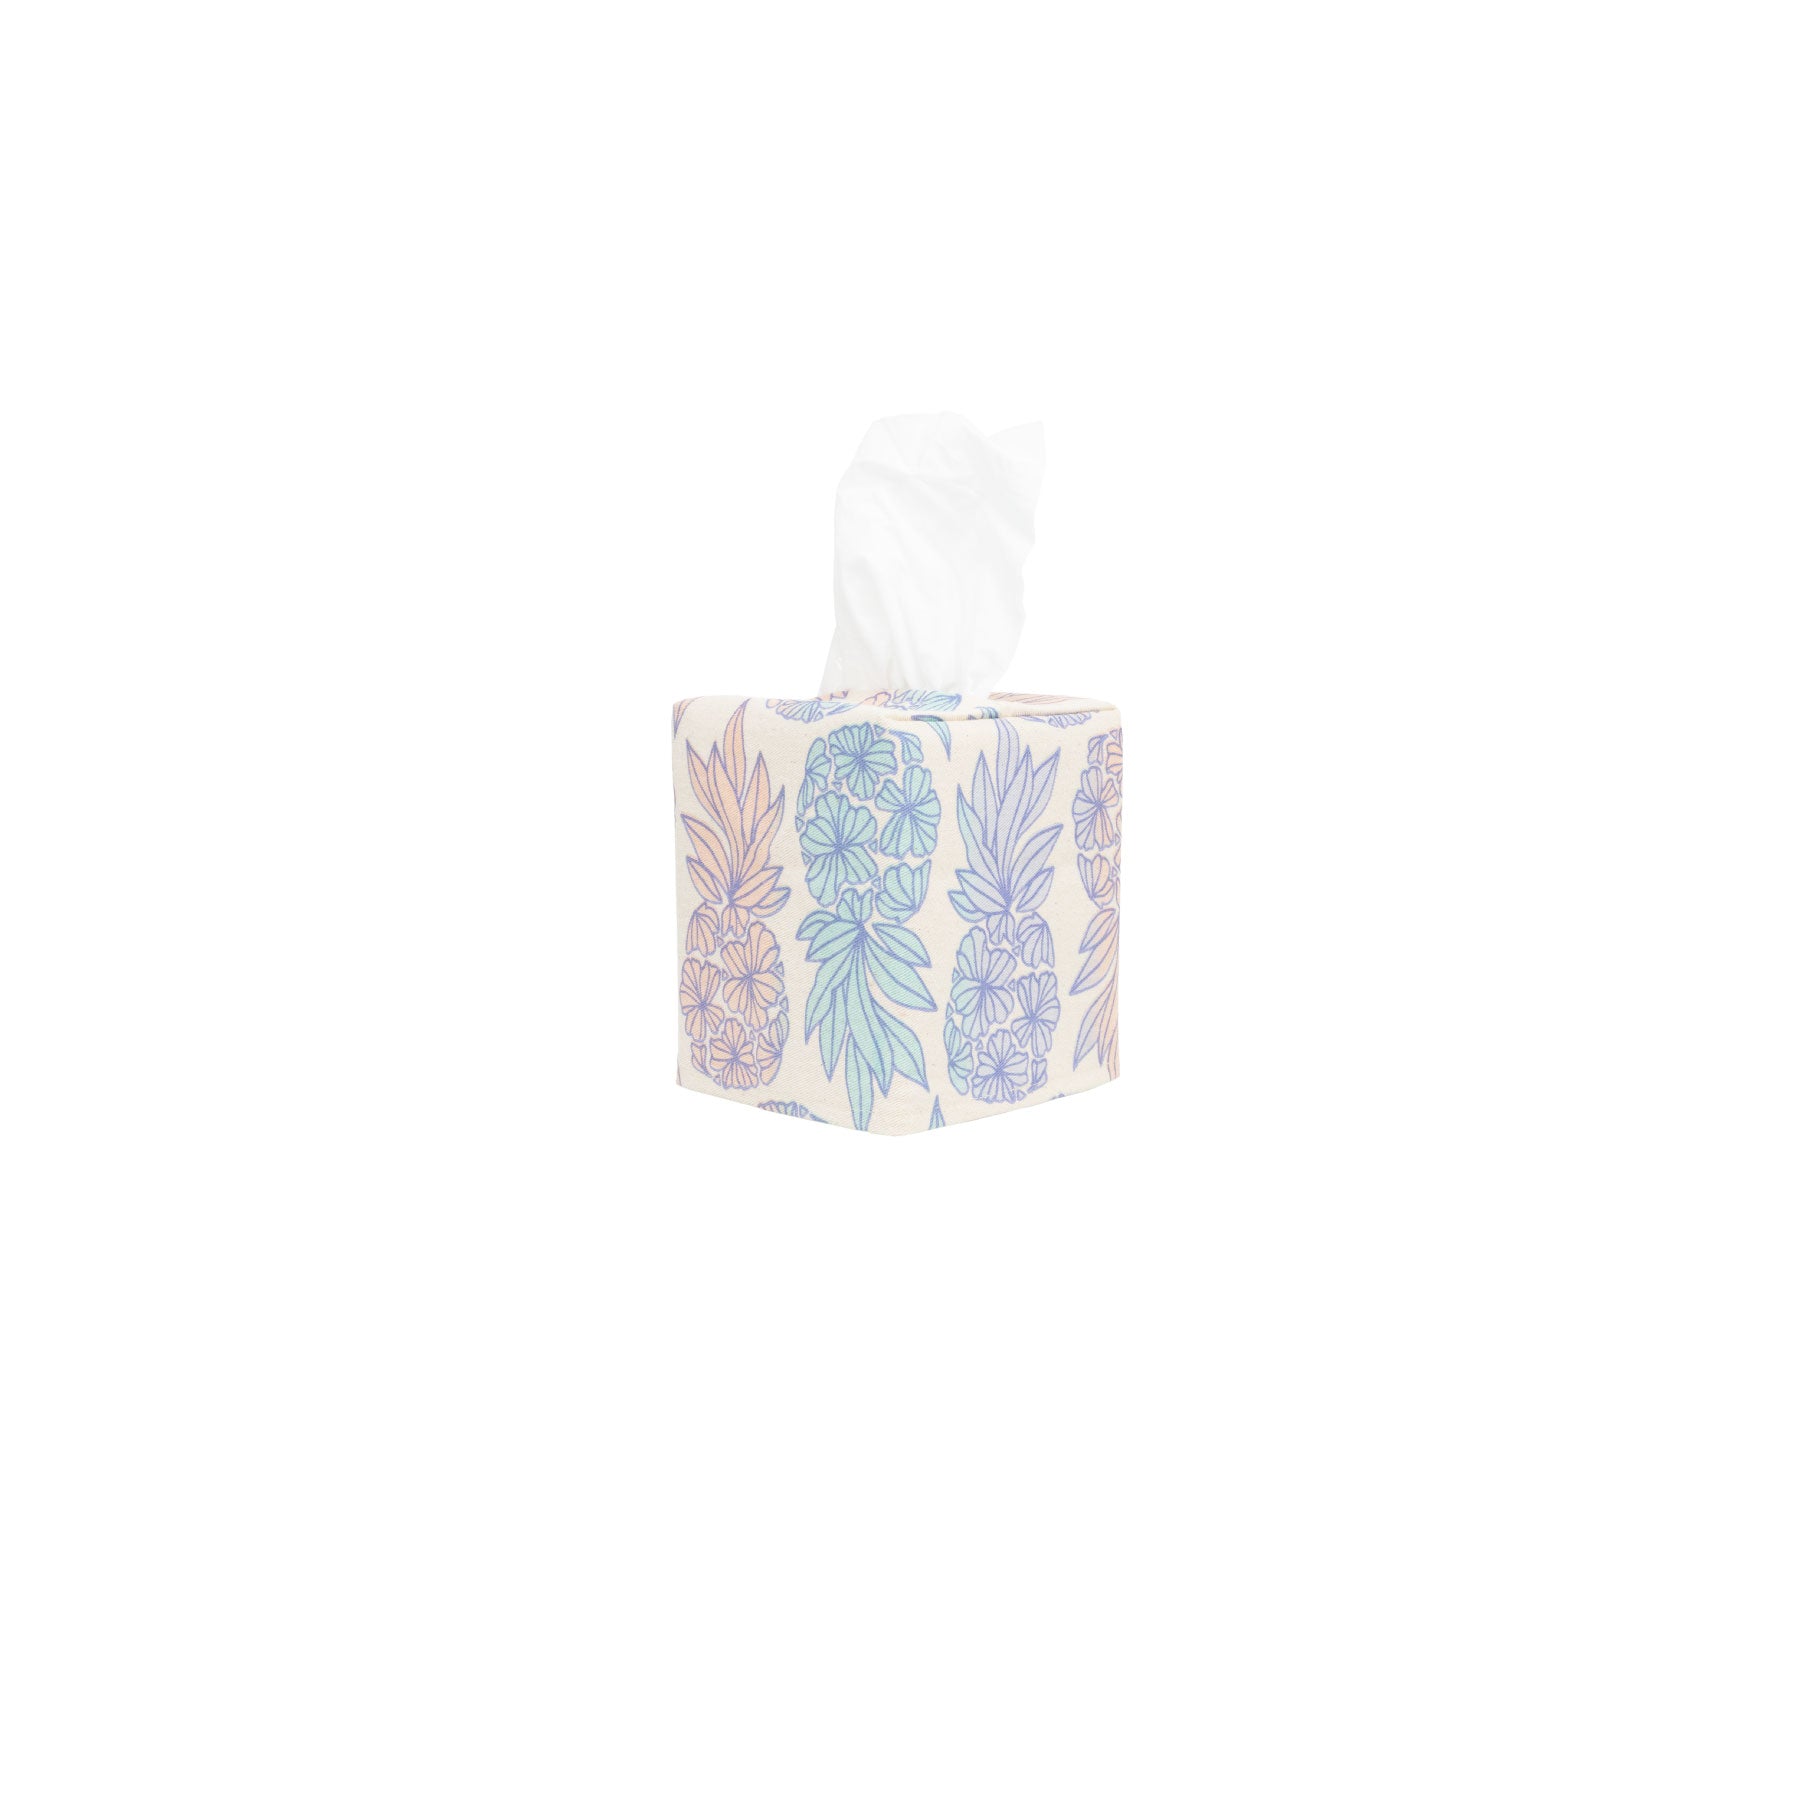 Square Tissue Box Cover • Seaflower Pineapple • Dusty Navy over Soothing Blush and Blues Ombre